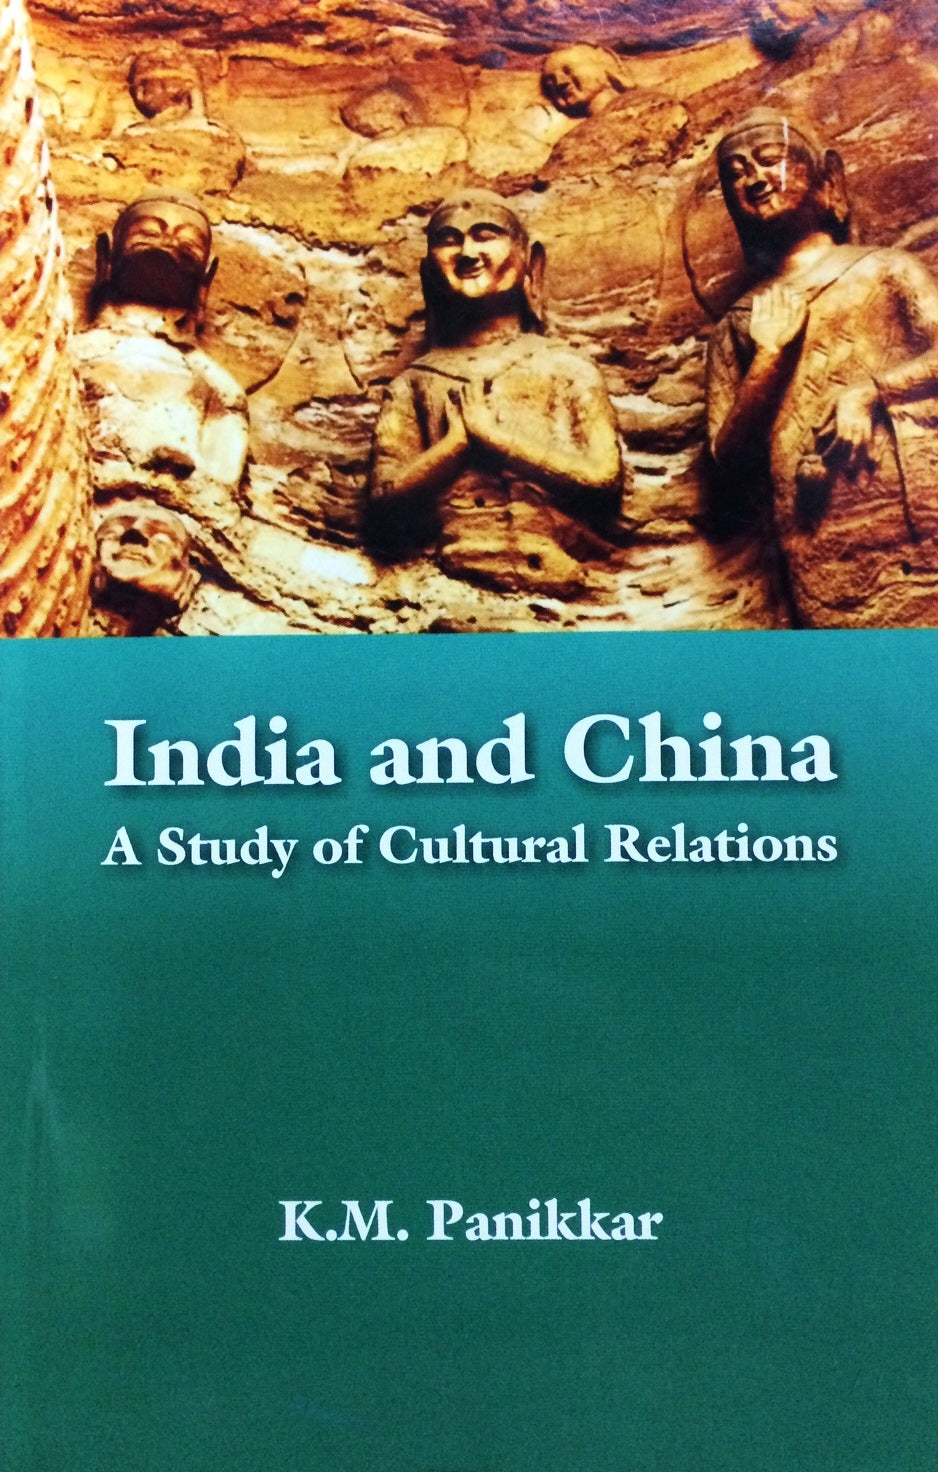 India and China: A Study of Cultural Relations